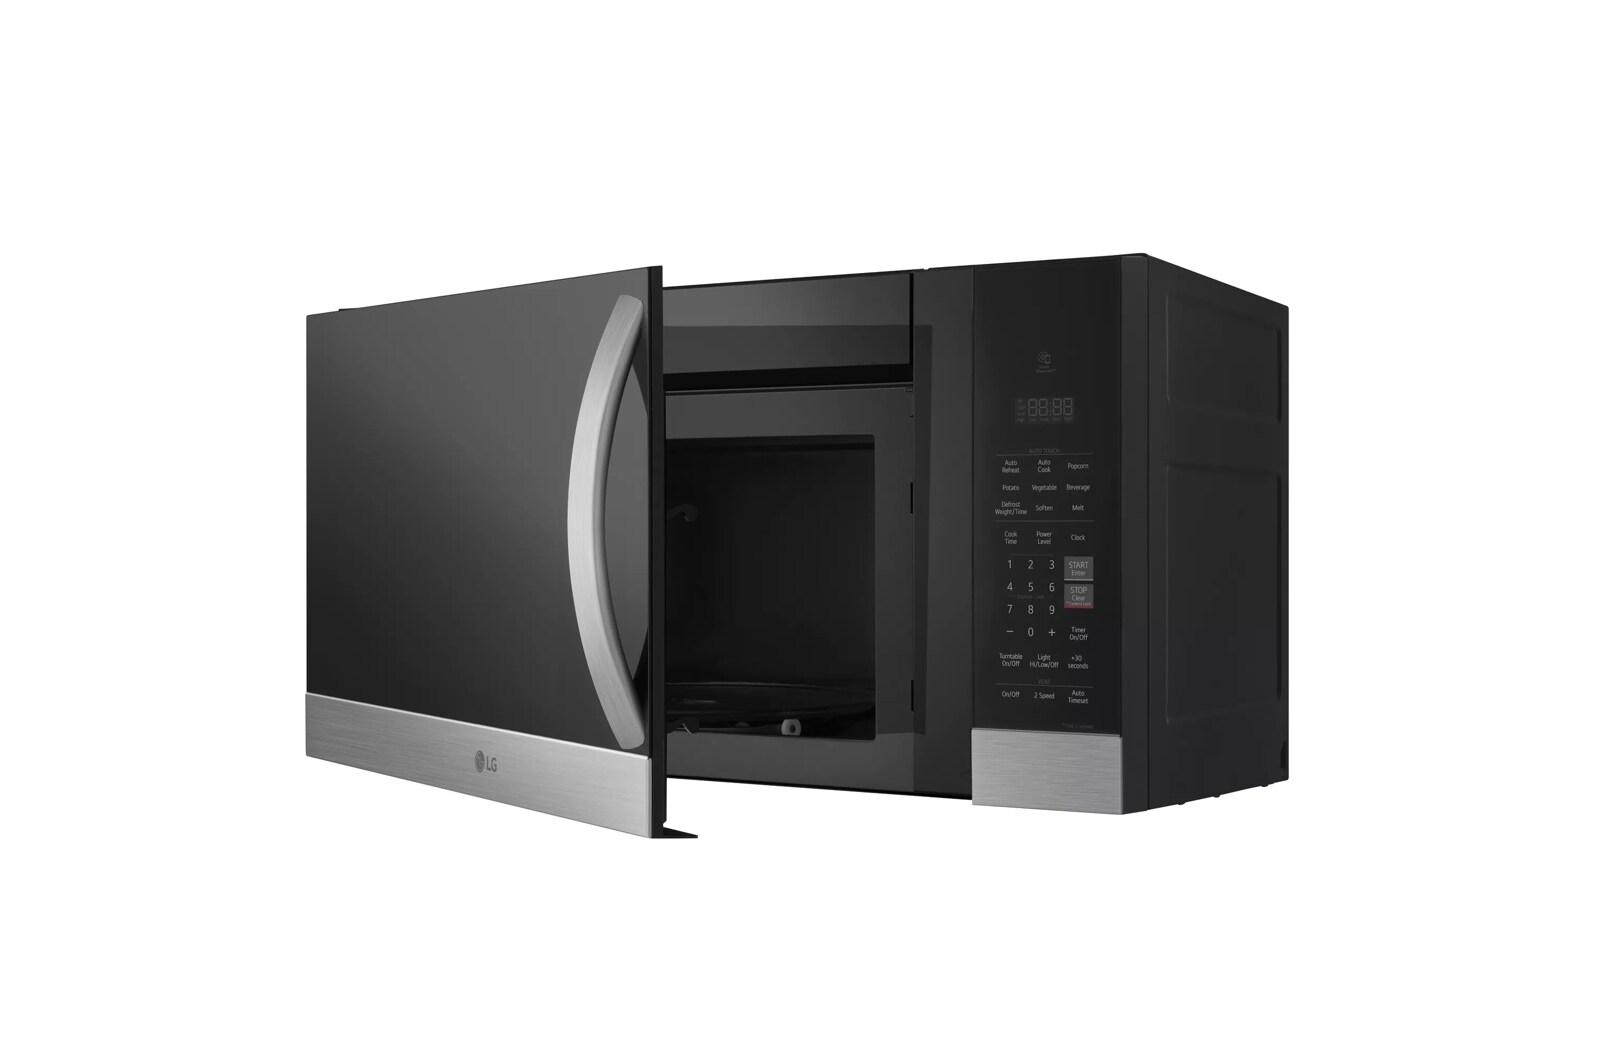 Lg 1.7 cu. ft. Over-the-Range Microwave Oven